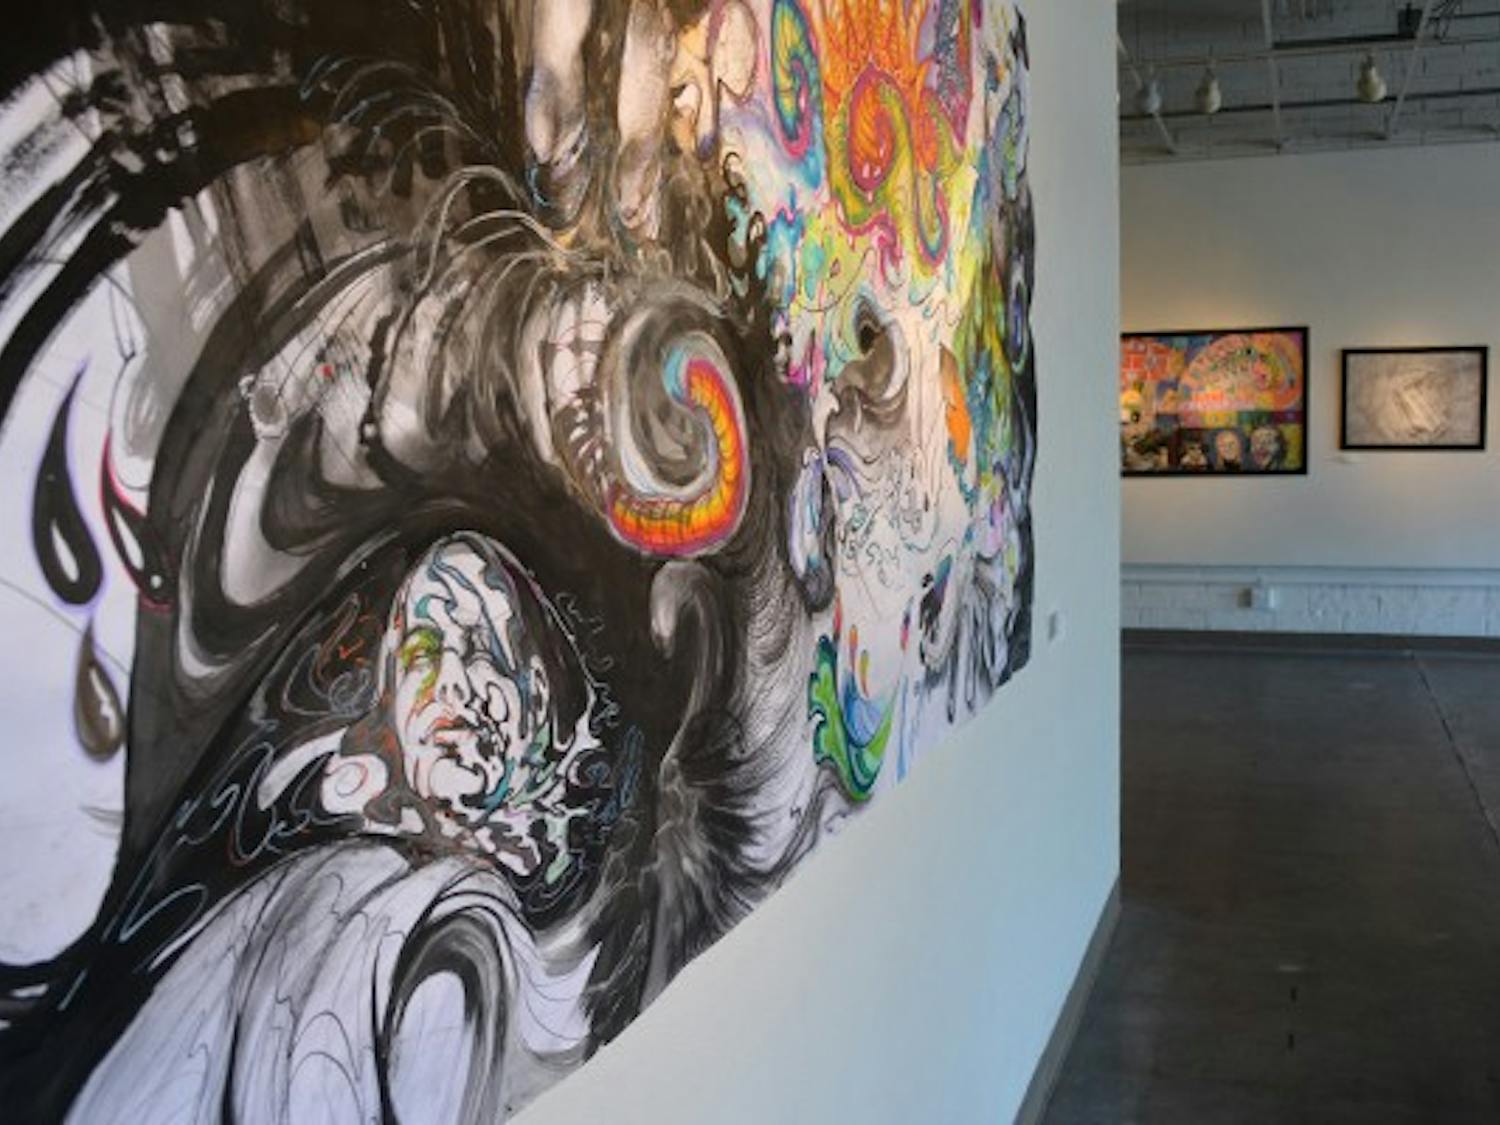 This large scale piece was made by all four artists and titled "Collaboration". (Photo by Aubrey Rumore)